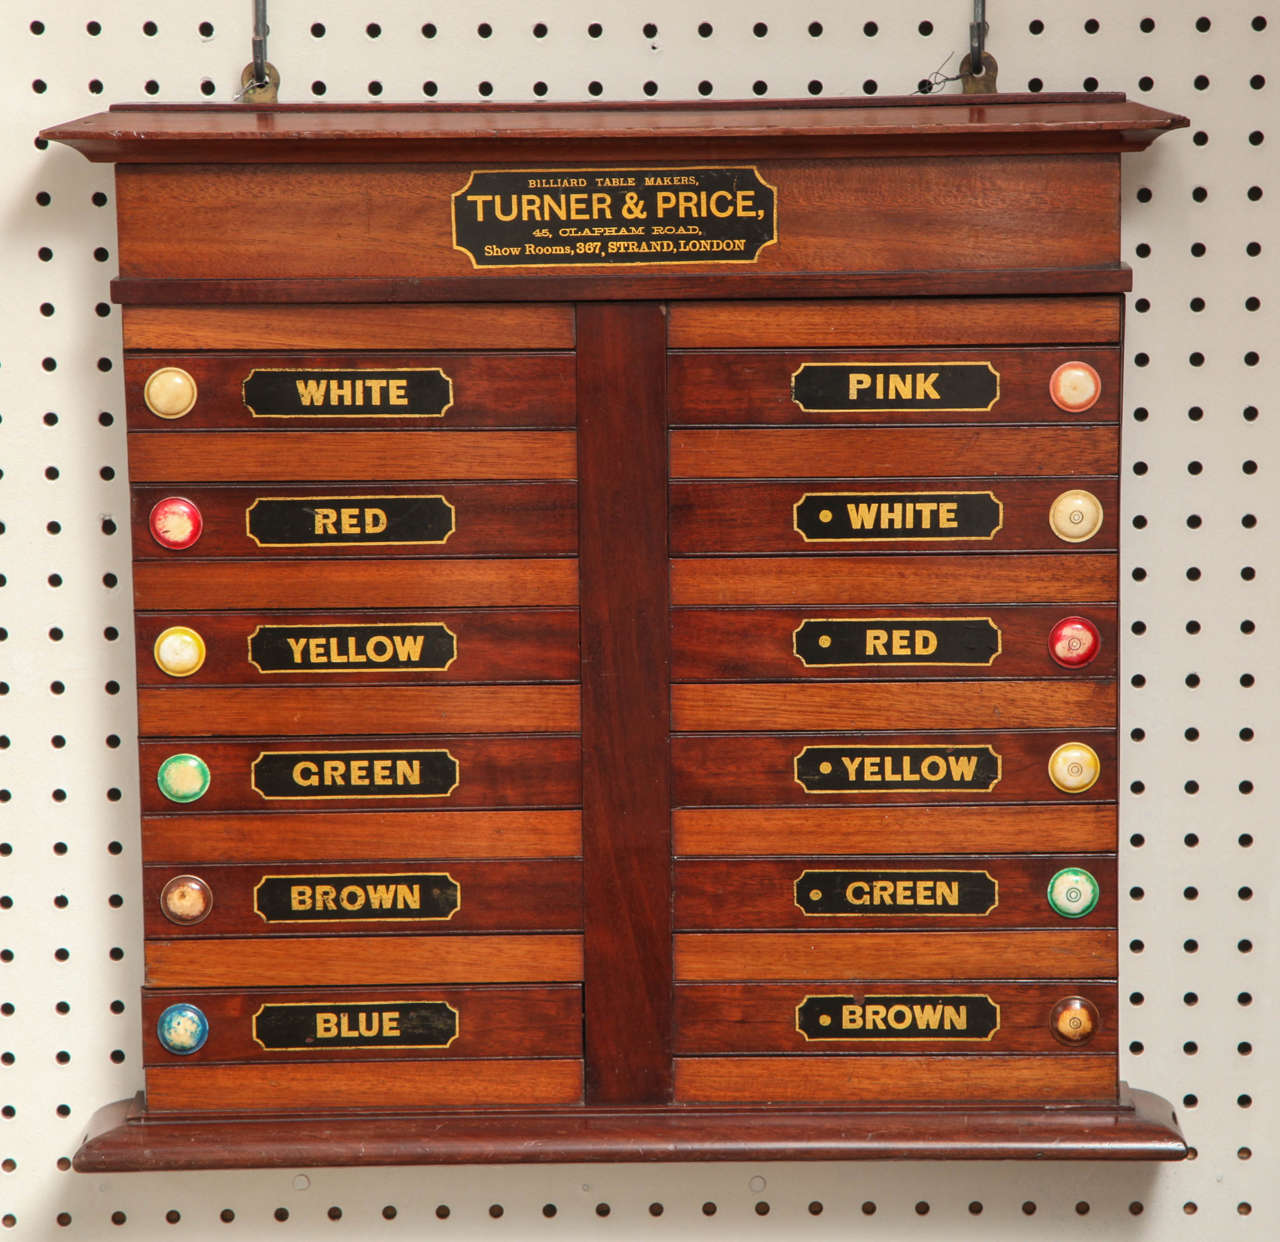 Original scoreboard from a British Billiards room

Handpicked by buyers at Ann-Morris, Inc.